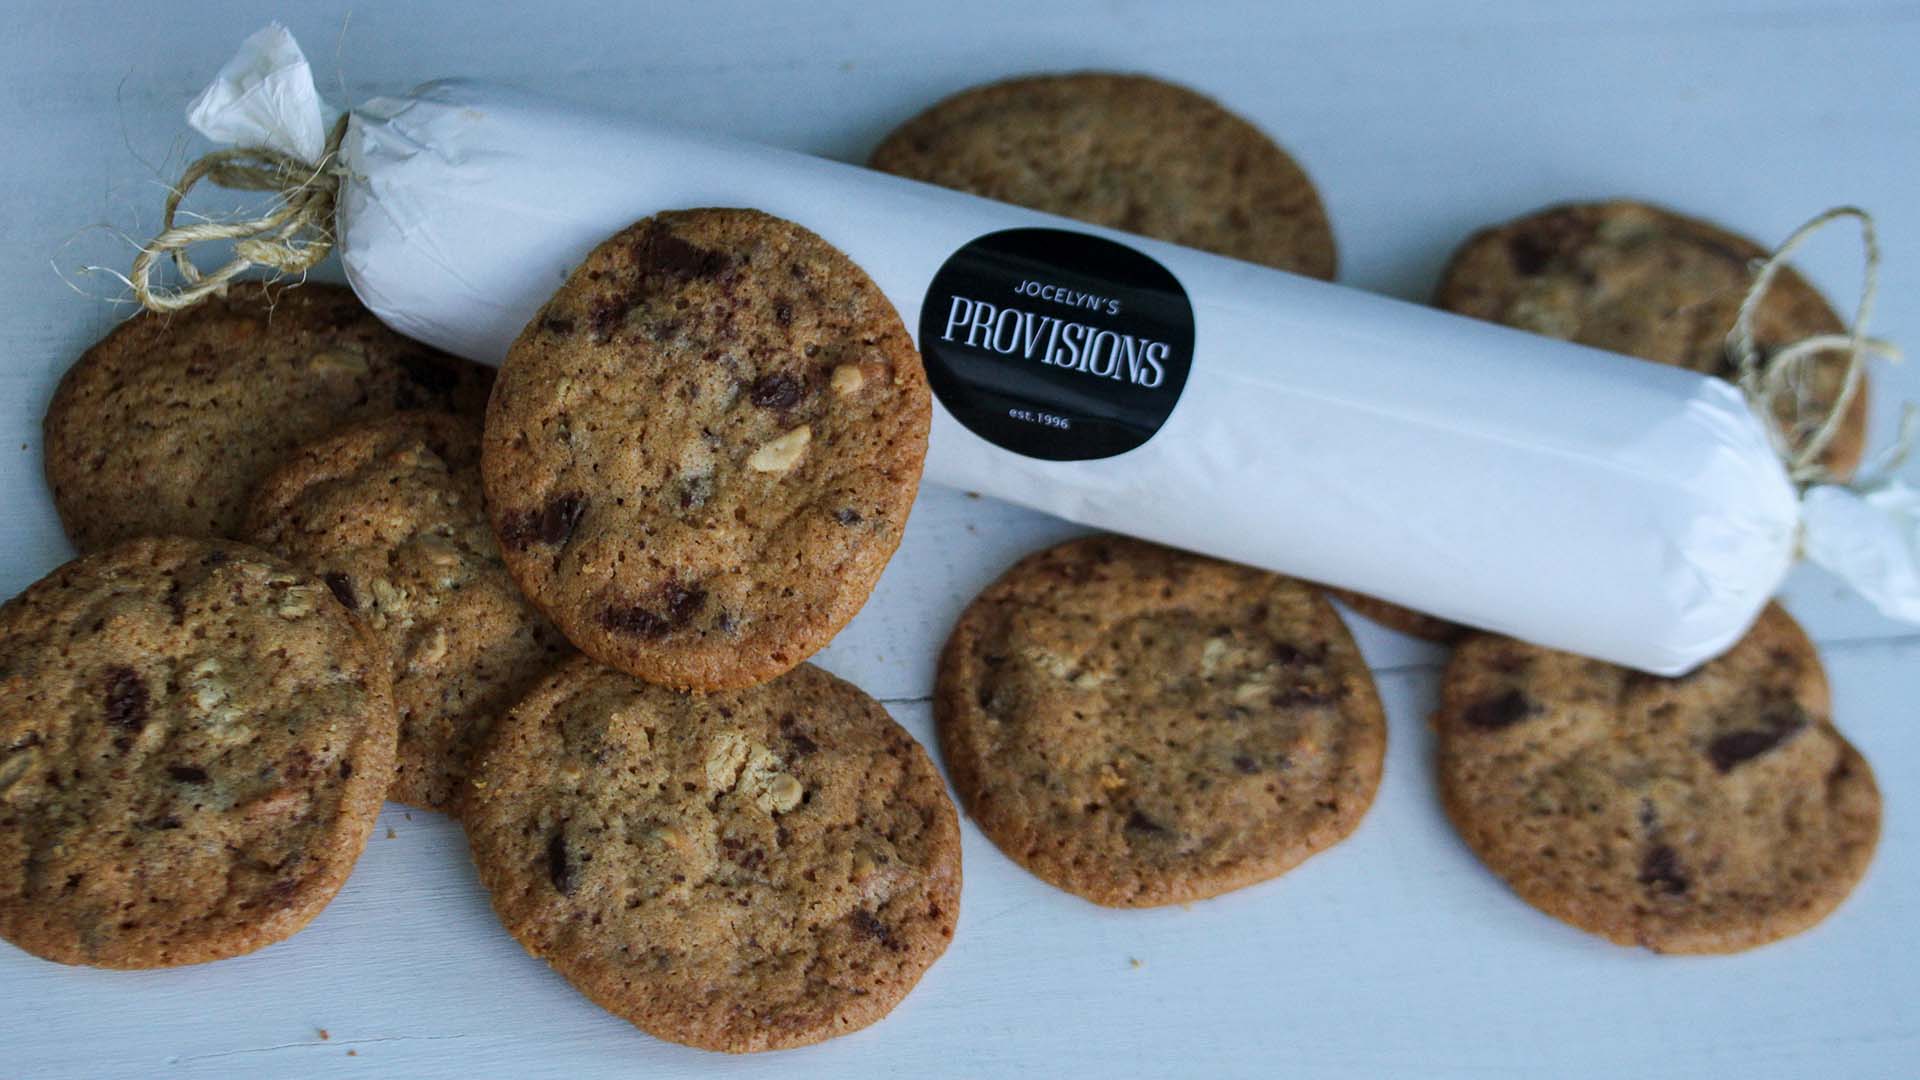 Jocelyn's Provisions Is Now Selling Choc Chip Cookie Dough That You Can Bake at Home